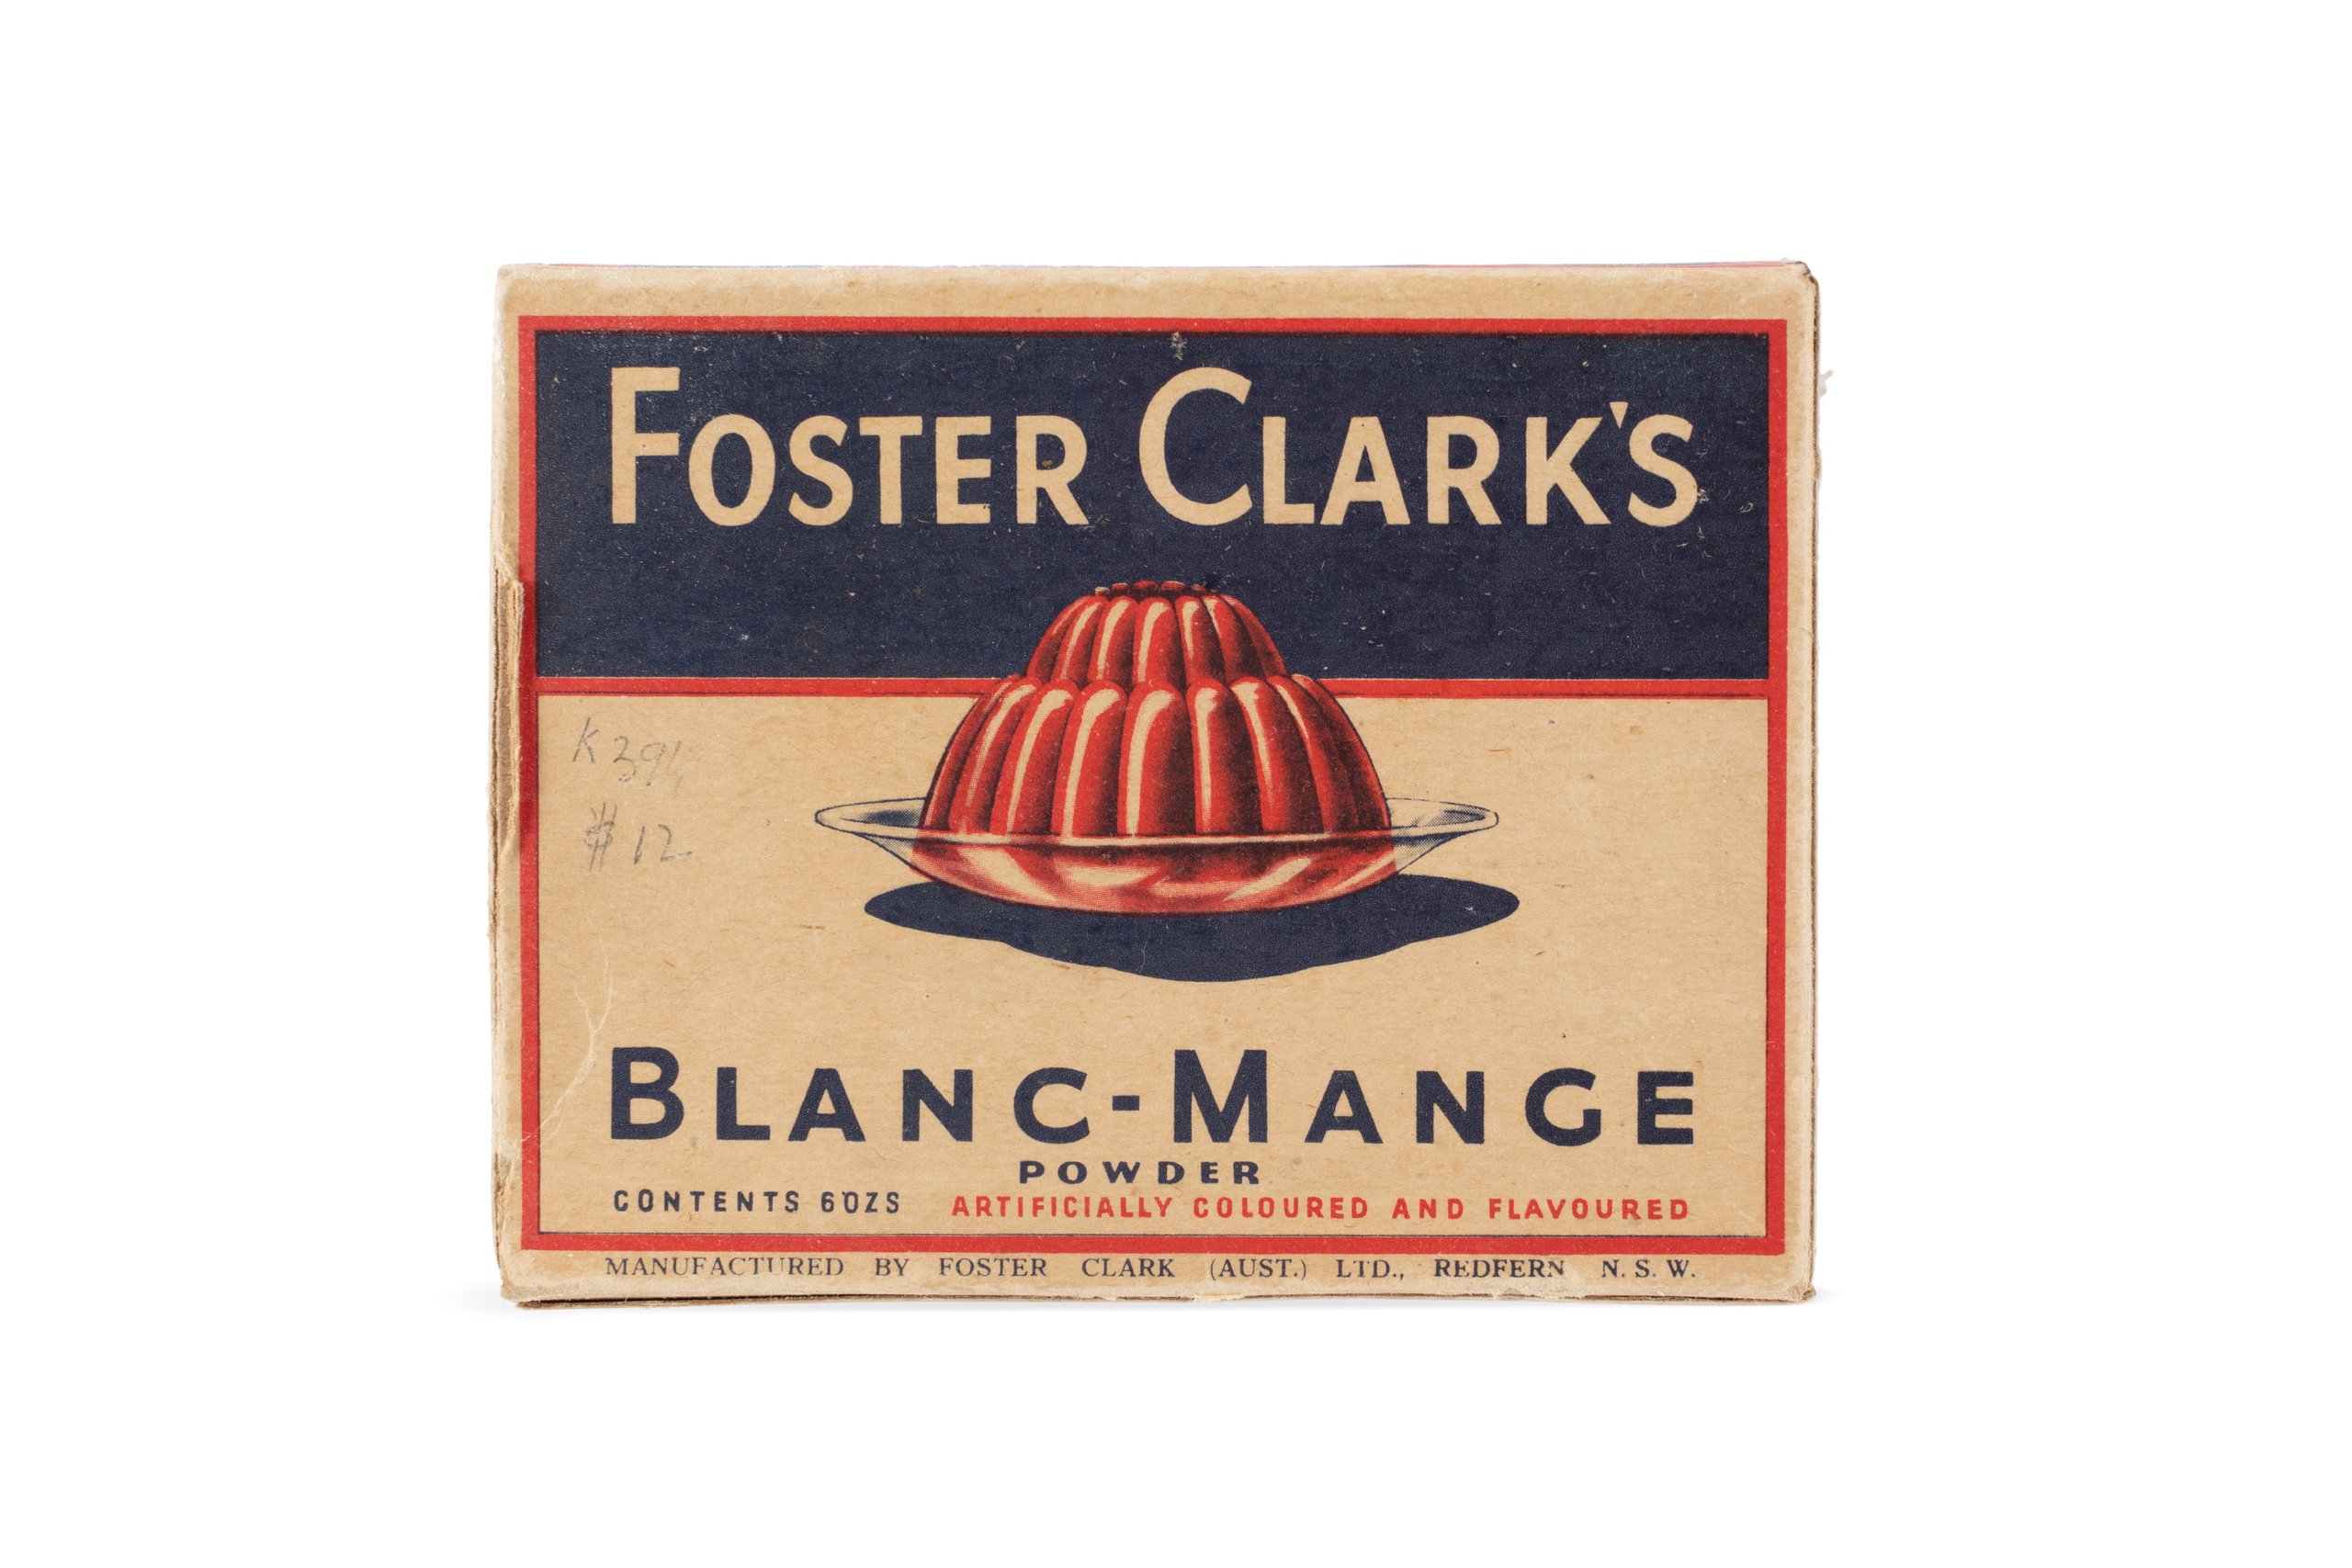 Pudding mix 'Blanc-Mange' packet by Foster Clark Ltd